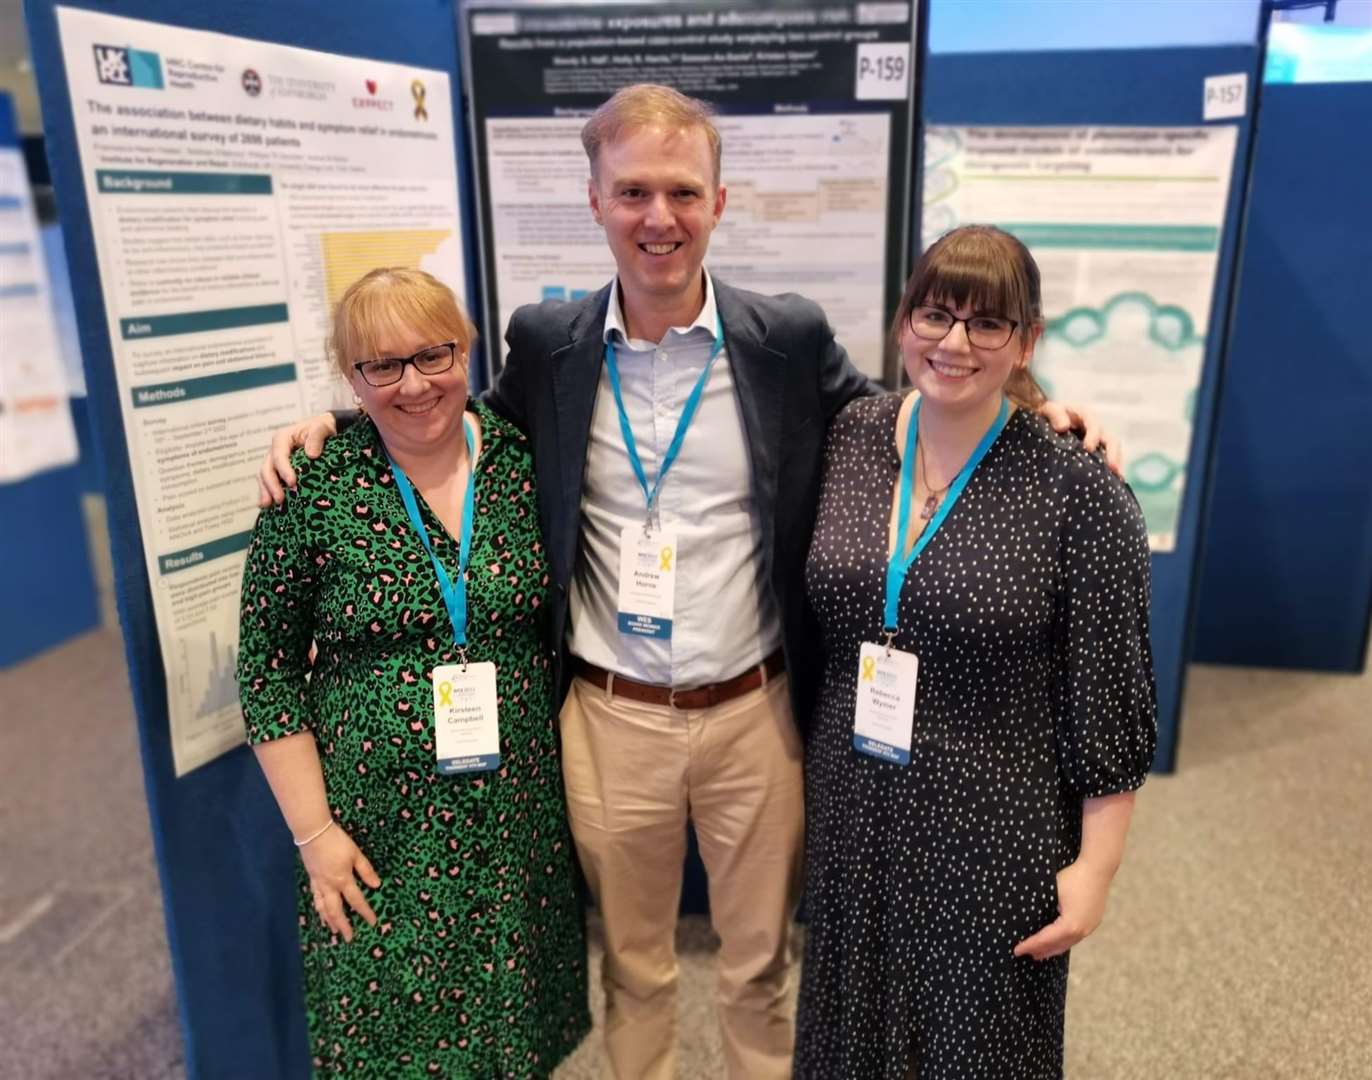 Professor Andrew Horne from Edinburgh’s EXPPECT Centre for Pelvic Pain and Endometriosis with Kirsteen Campbell (left) and Rebecca Wymer at the World Congress on Endometriosis.